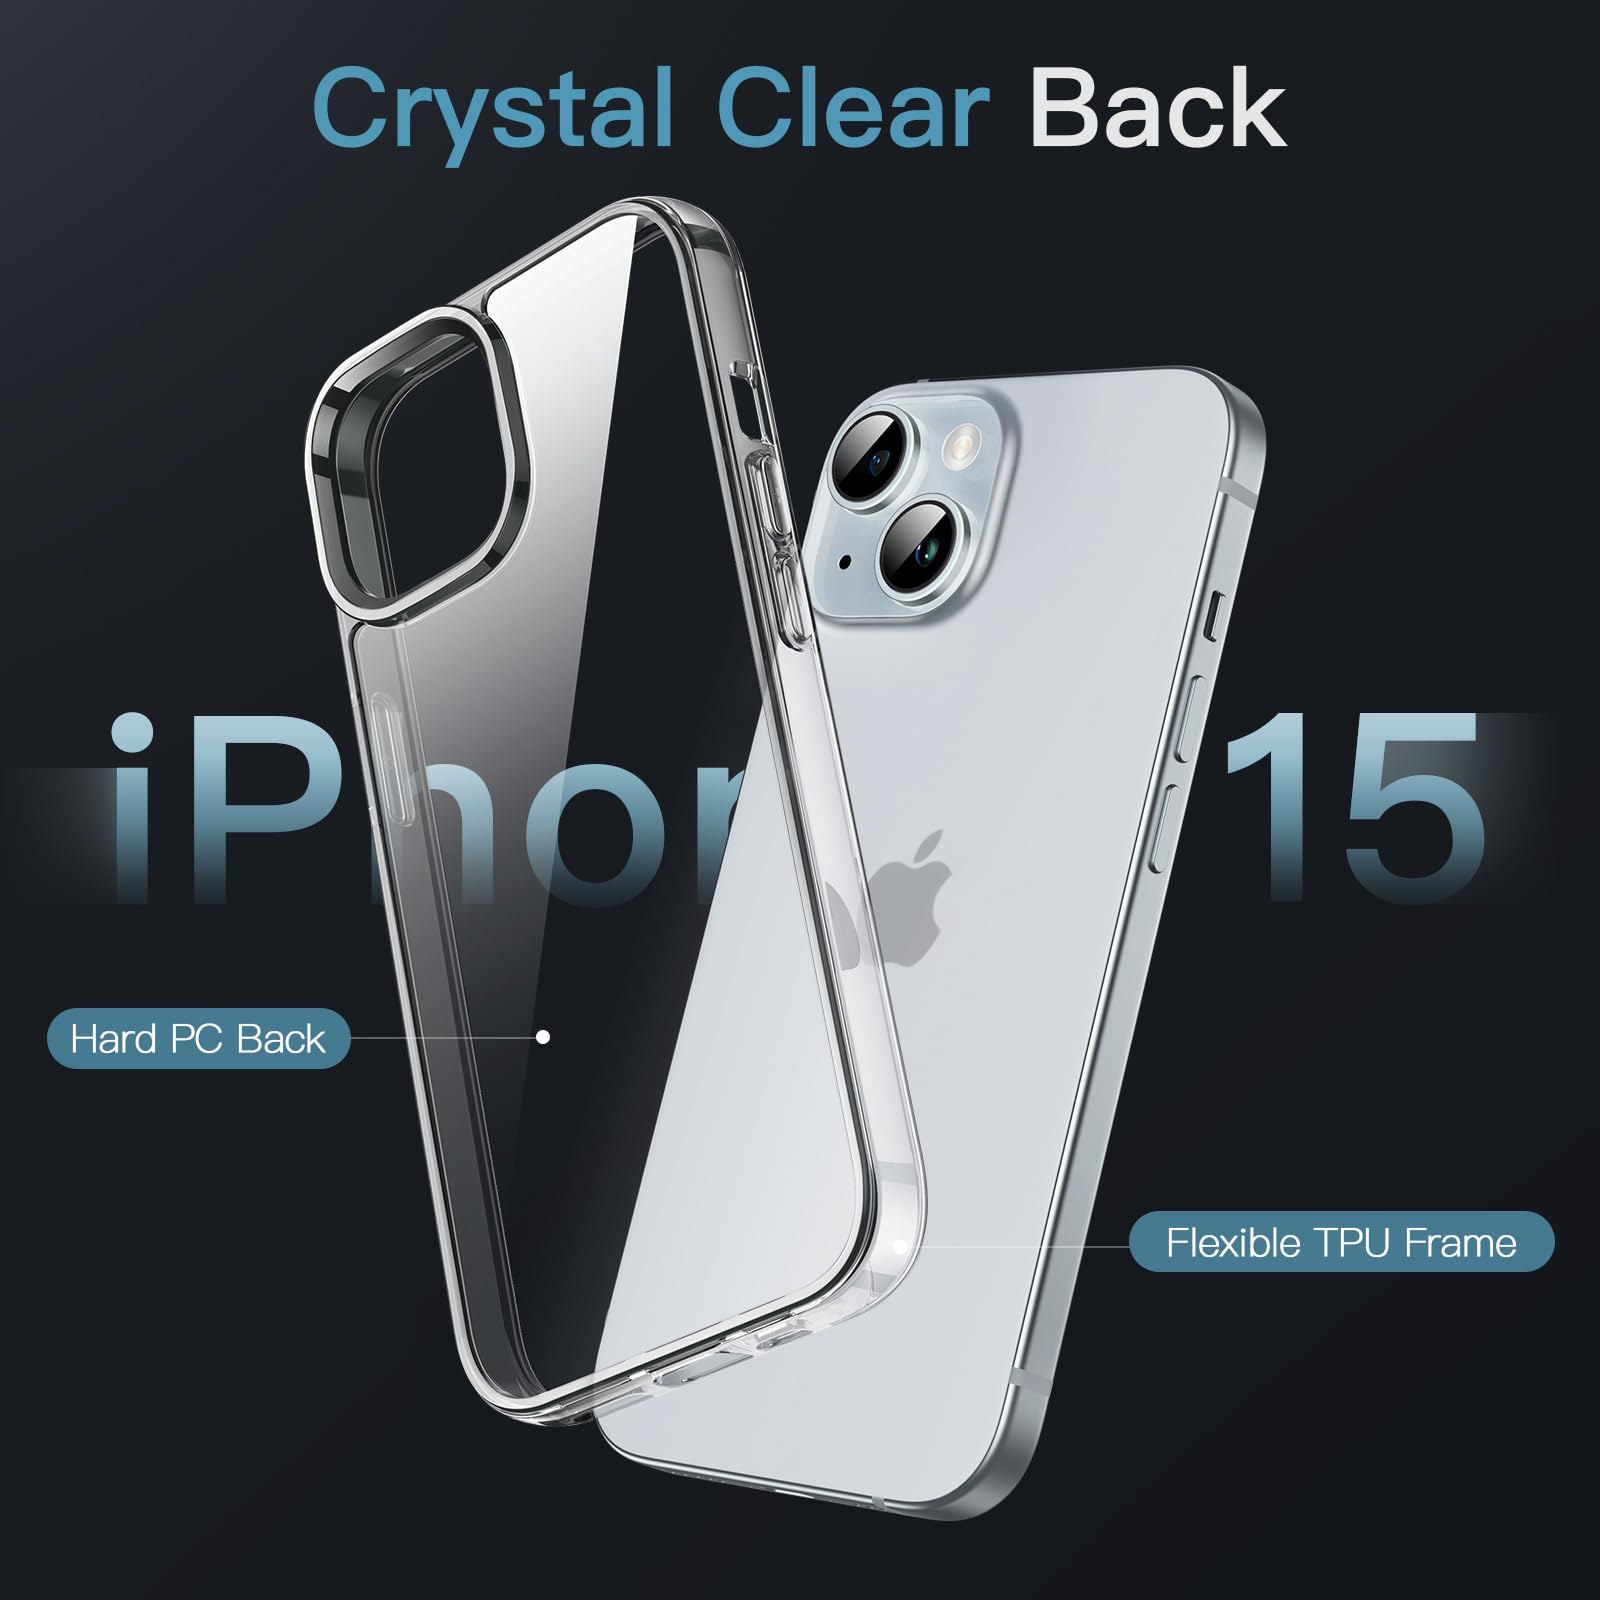 JETech Case for iPhone 12/12 Pro 6.1-Inch, Non-Yellowing Shockproof Phone Bumper Cover, Anti-Scratch Clear Back (HD Clear)